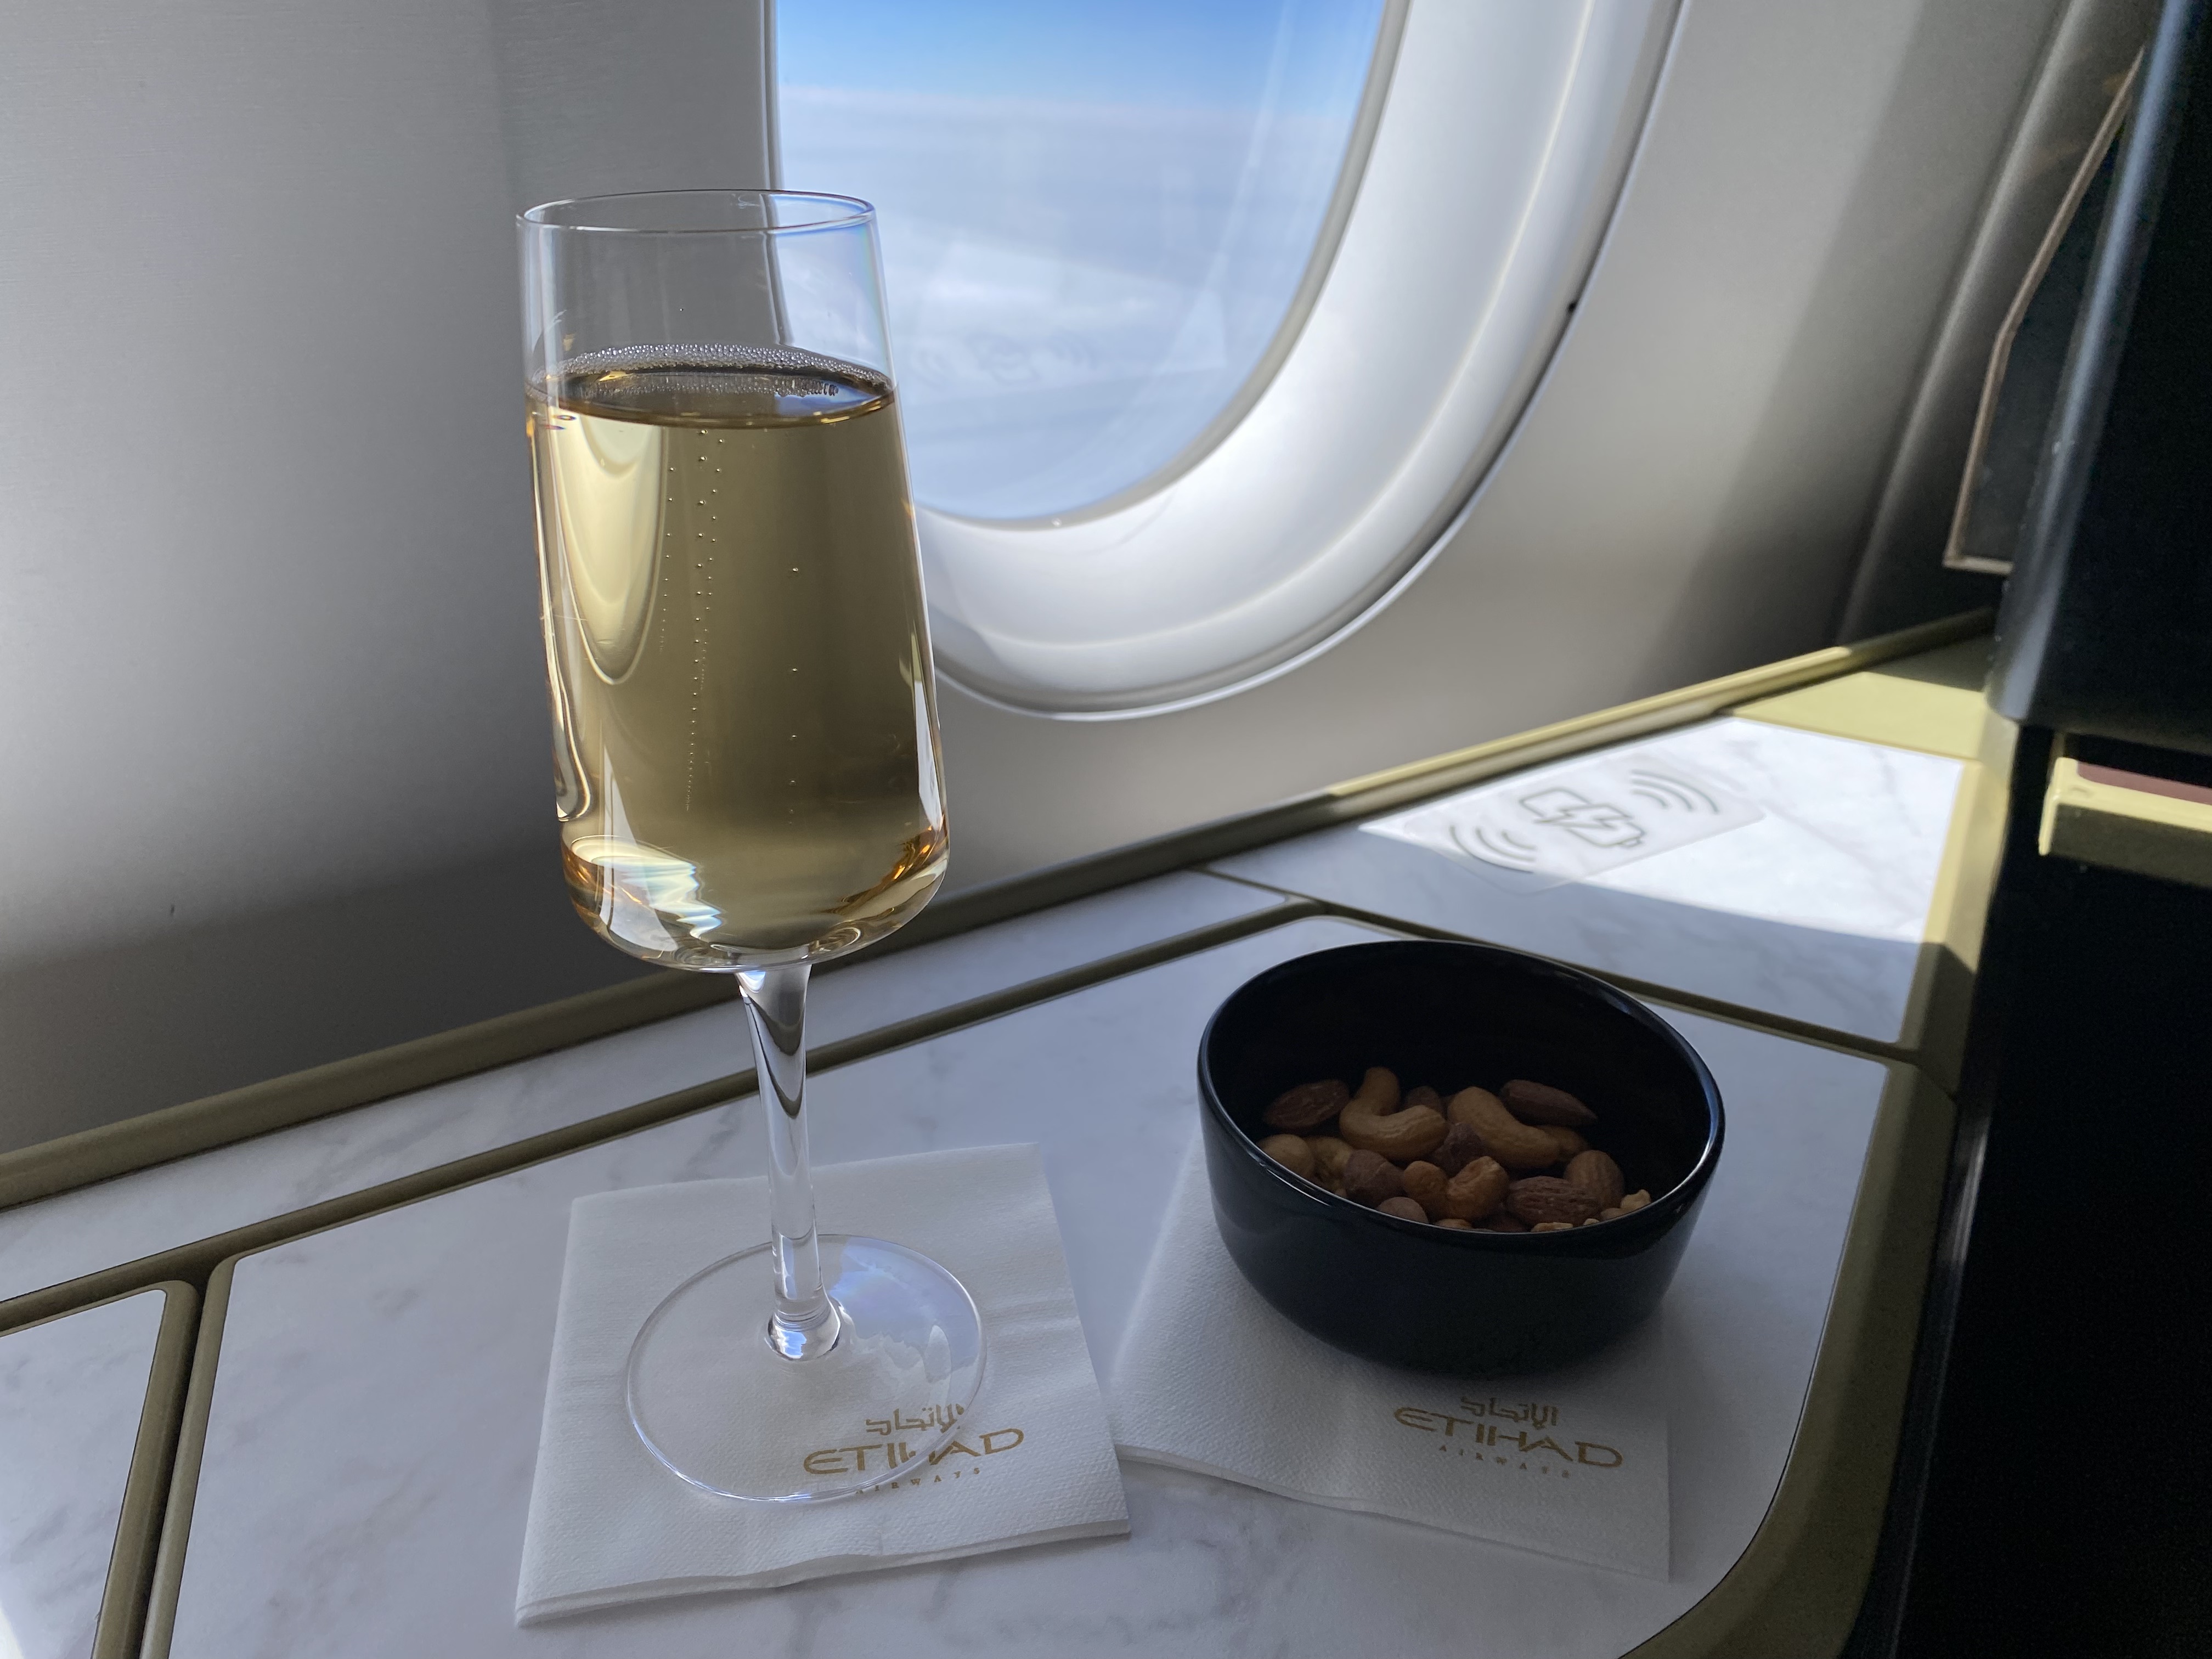 Duval-Leroy Brut Reserve, Champagne, France, NV · Mixed Nuts